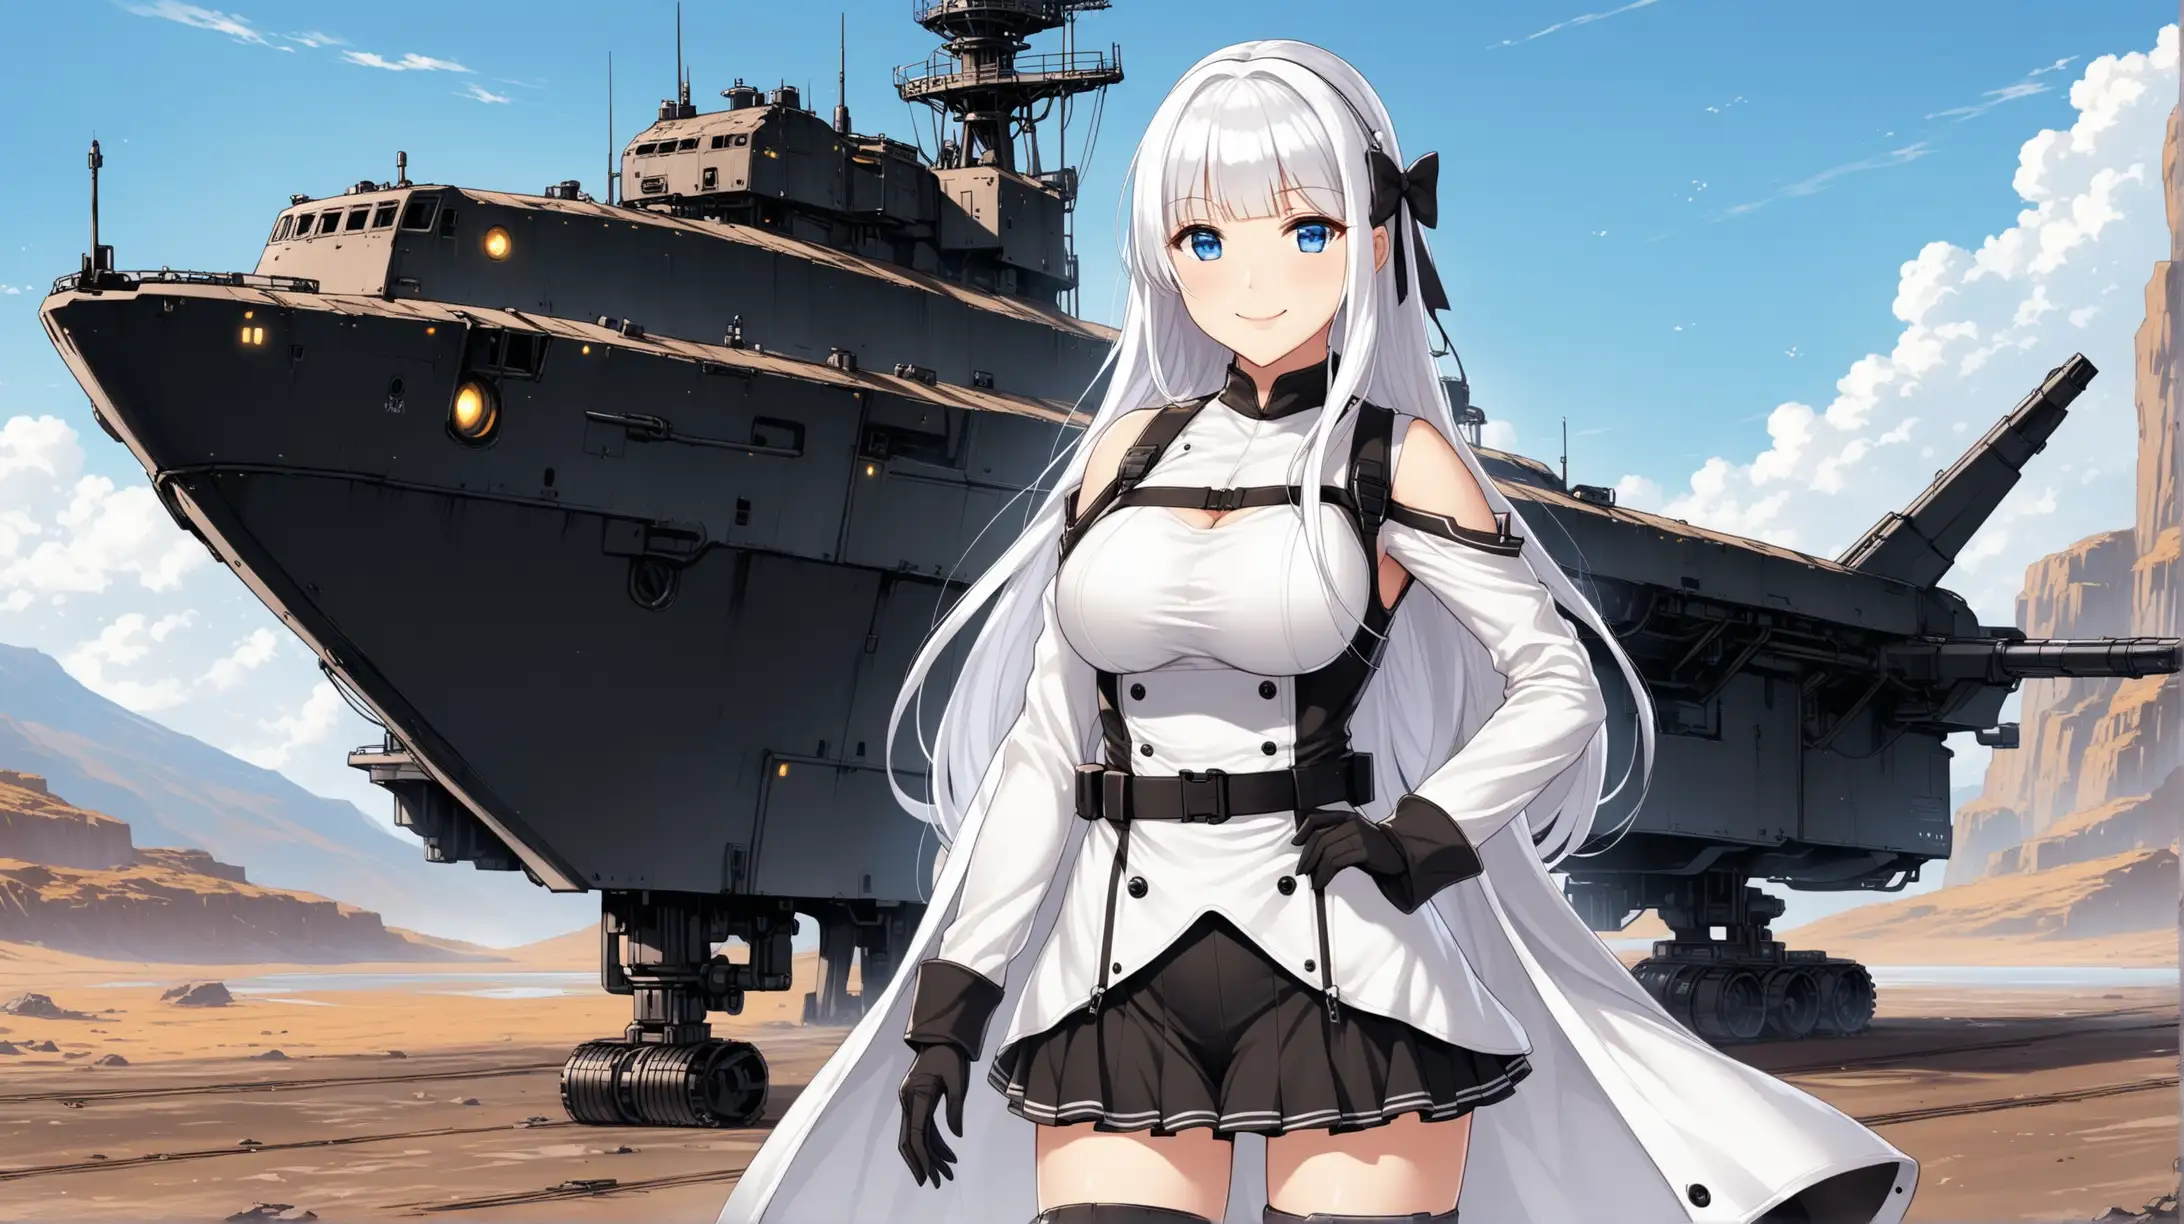 Draw the character Illustrious from Azur Lane, long hair, blue eyes, high quality, outdoors, standing in a confident pose, medium shot, wearing an outfit inspired from the Fallout series, smiling at the viewer